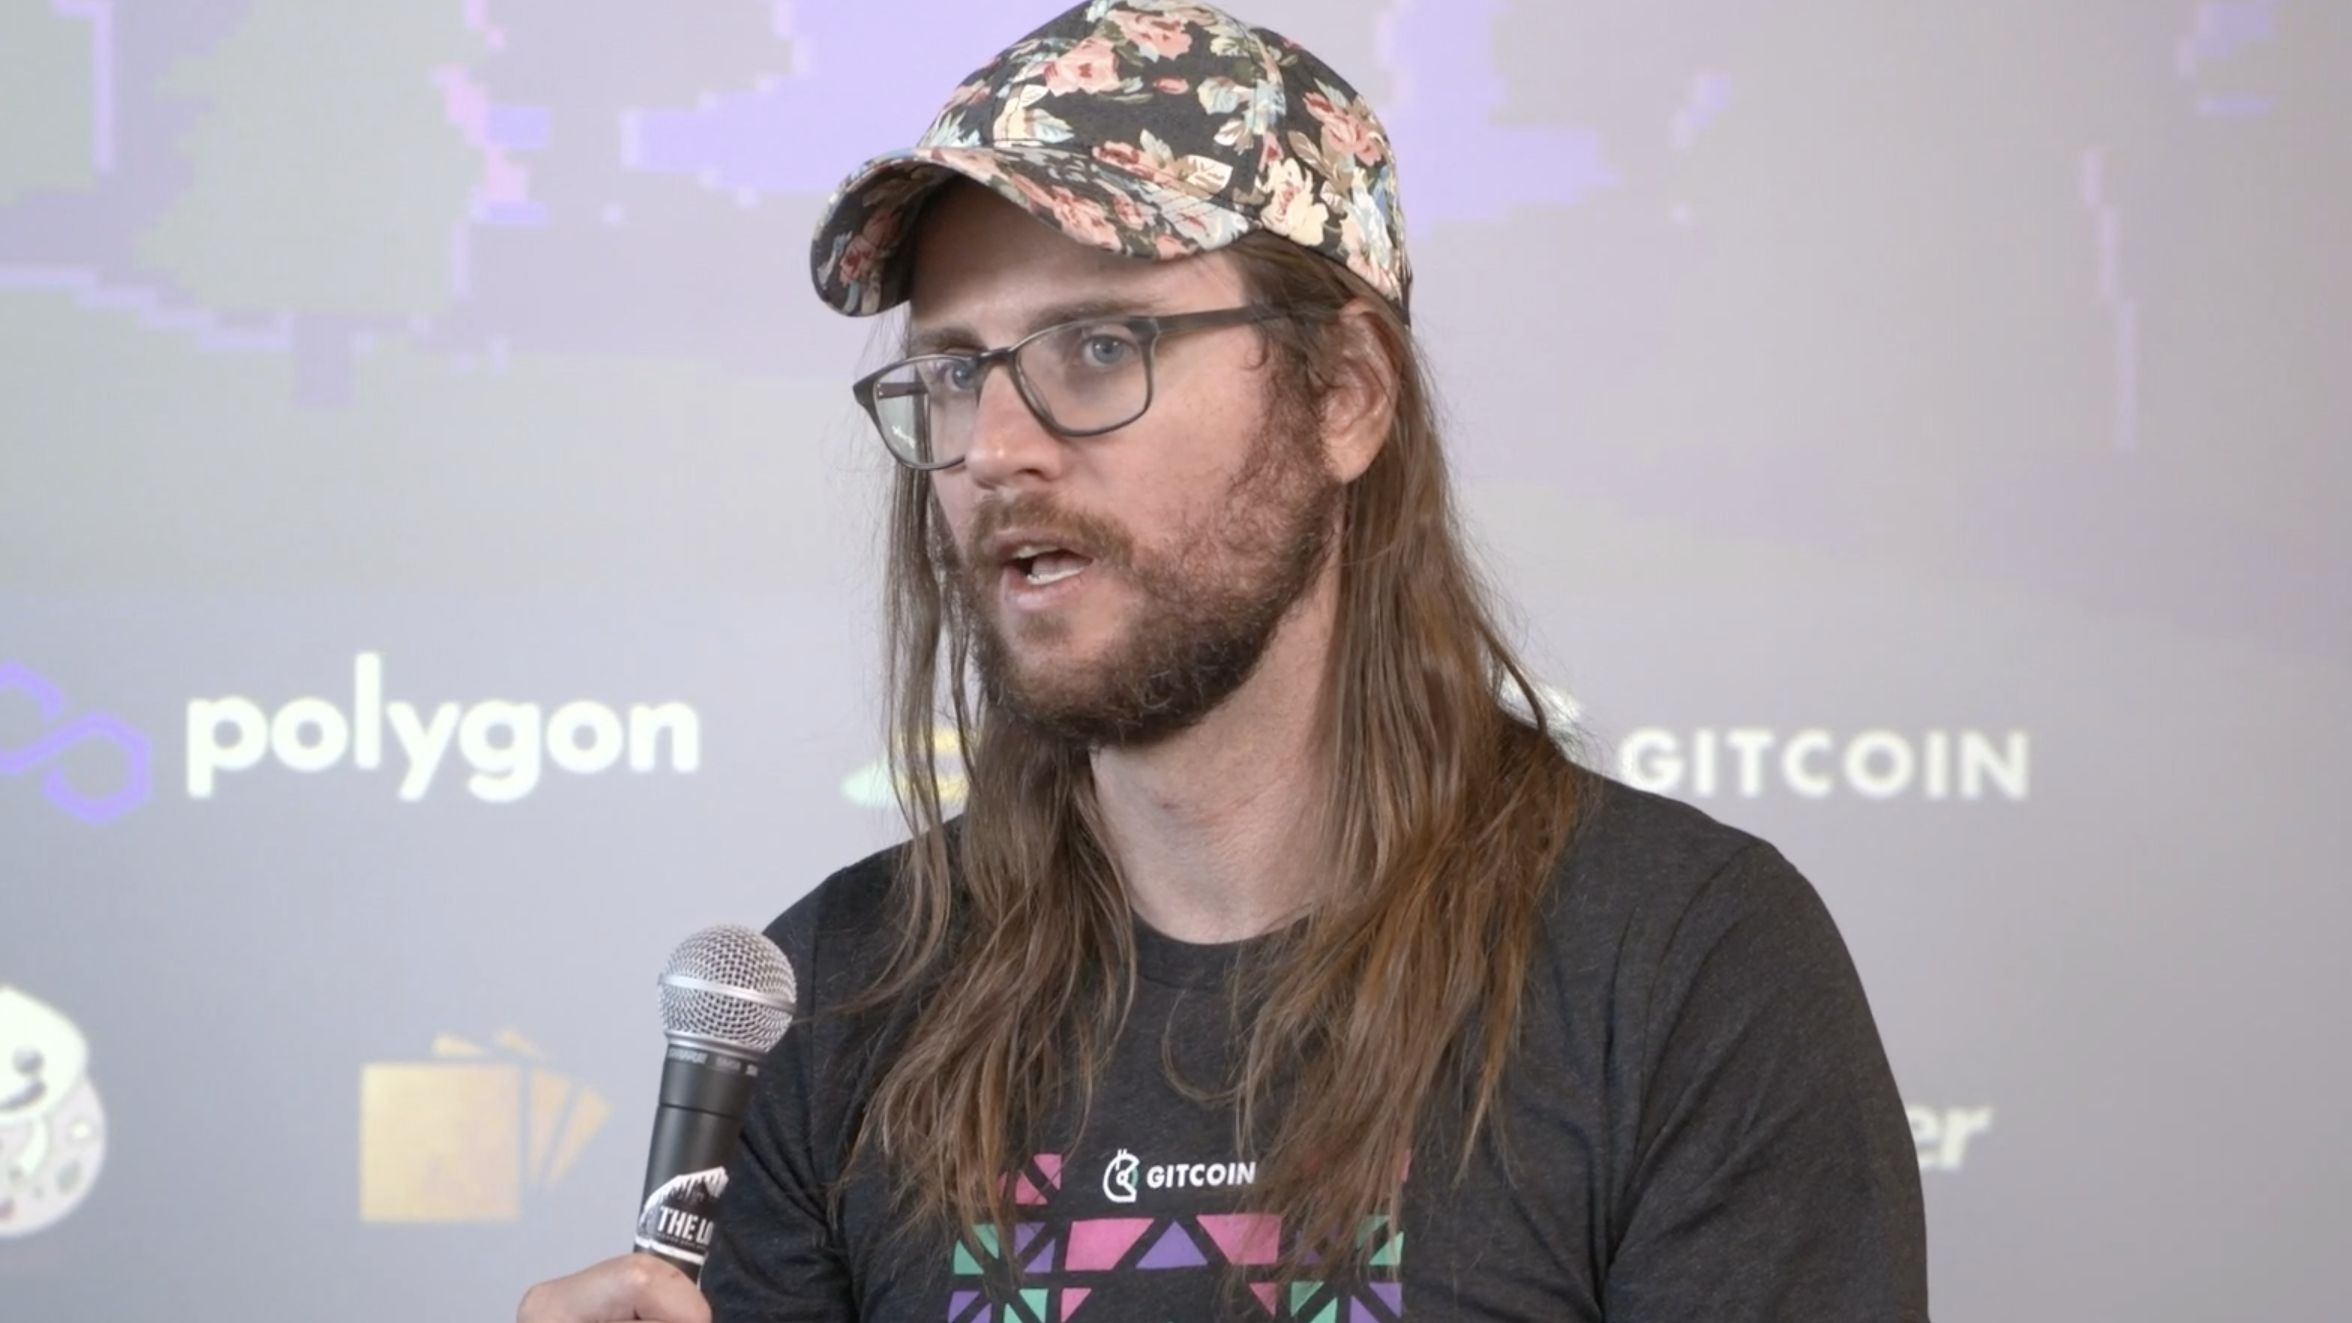 Gitcoin Co-Founder Kevin Owocki Says His Return Won't Make Him Center of the Network